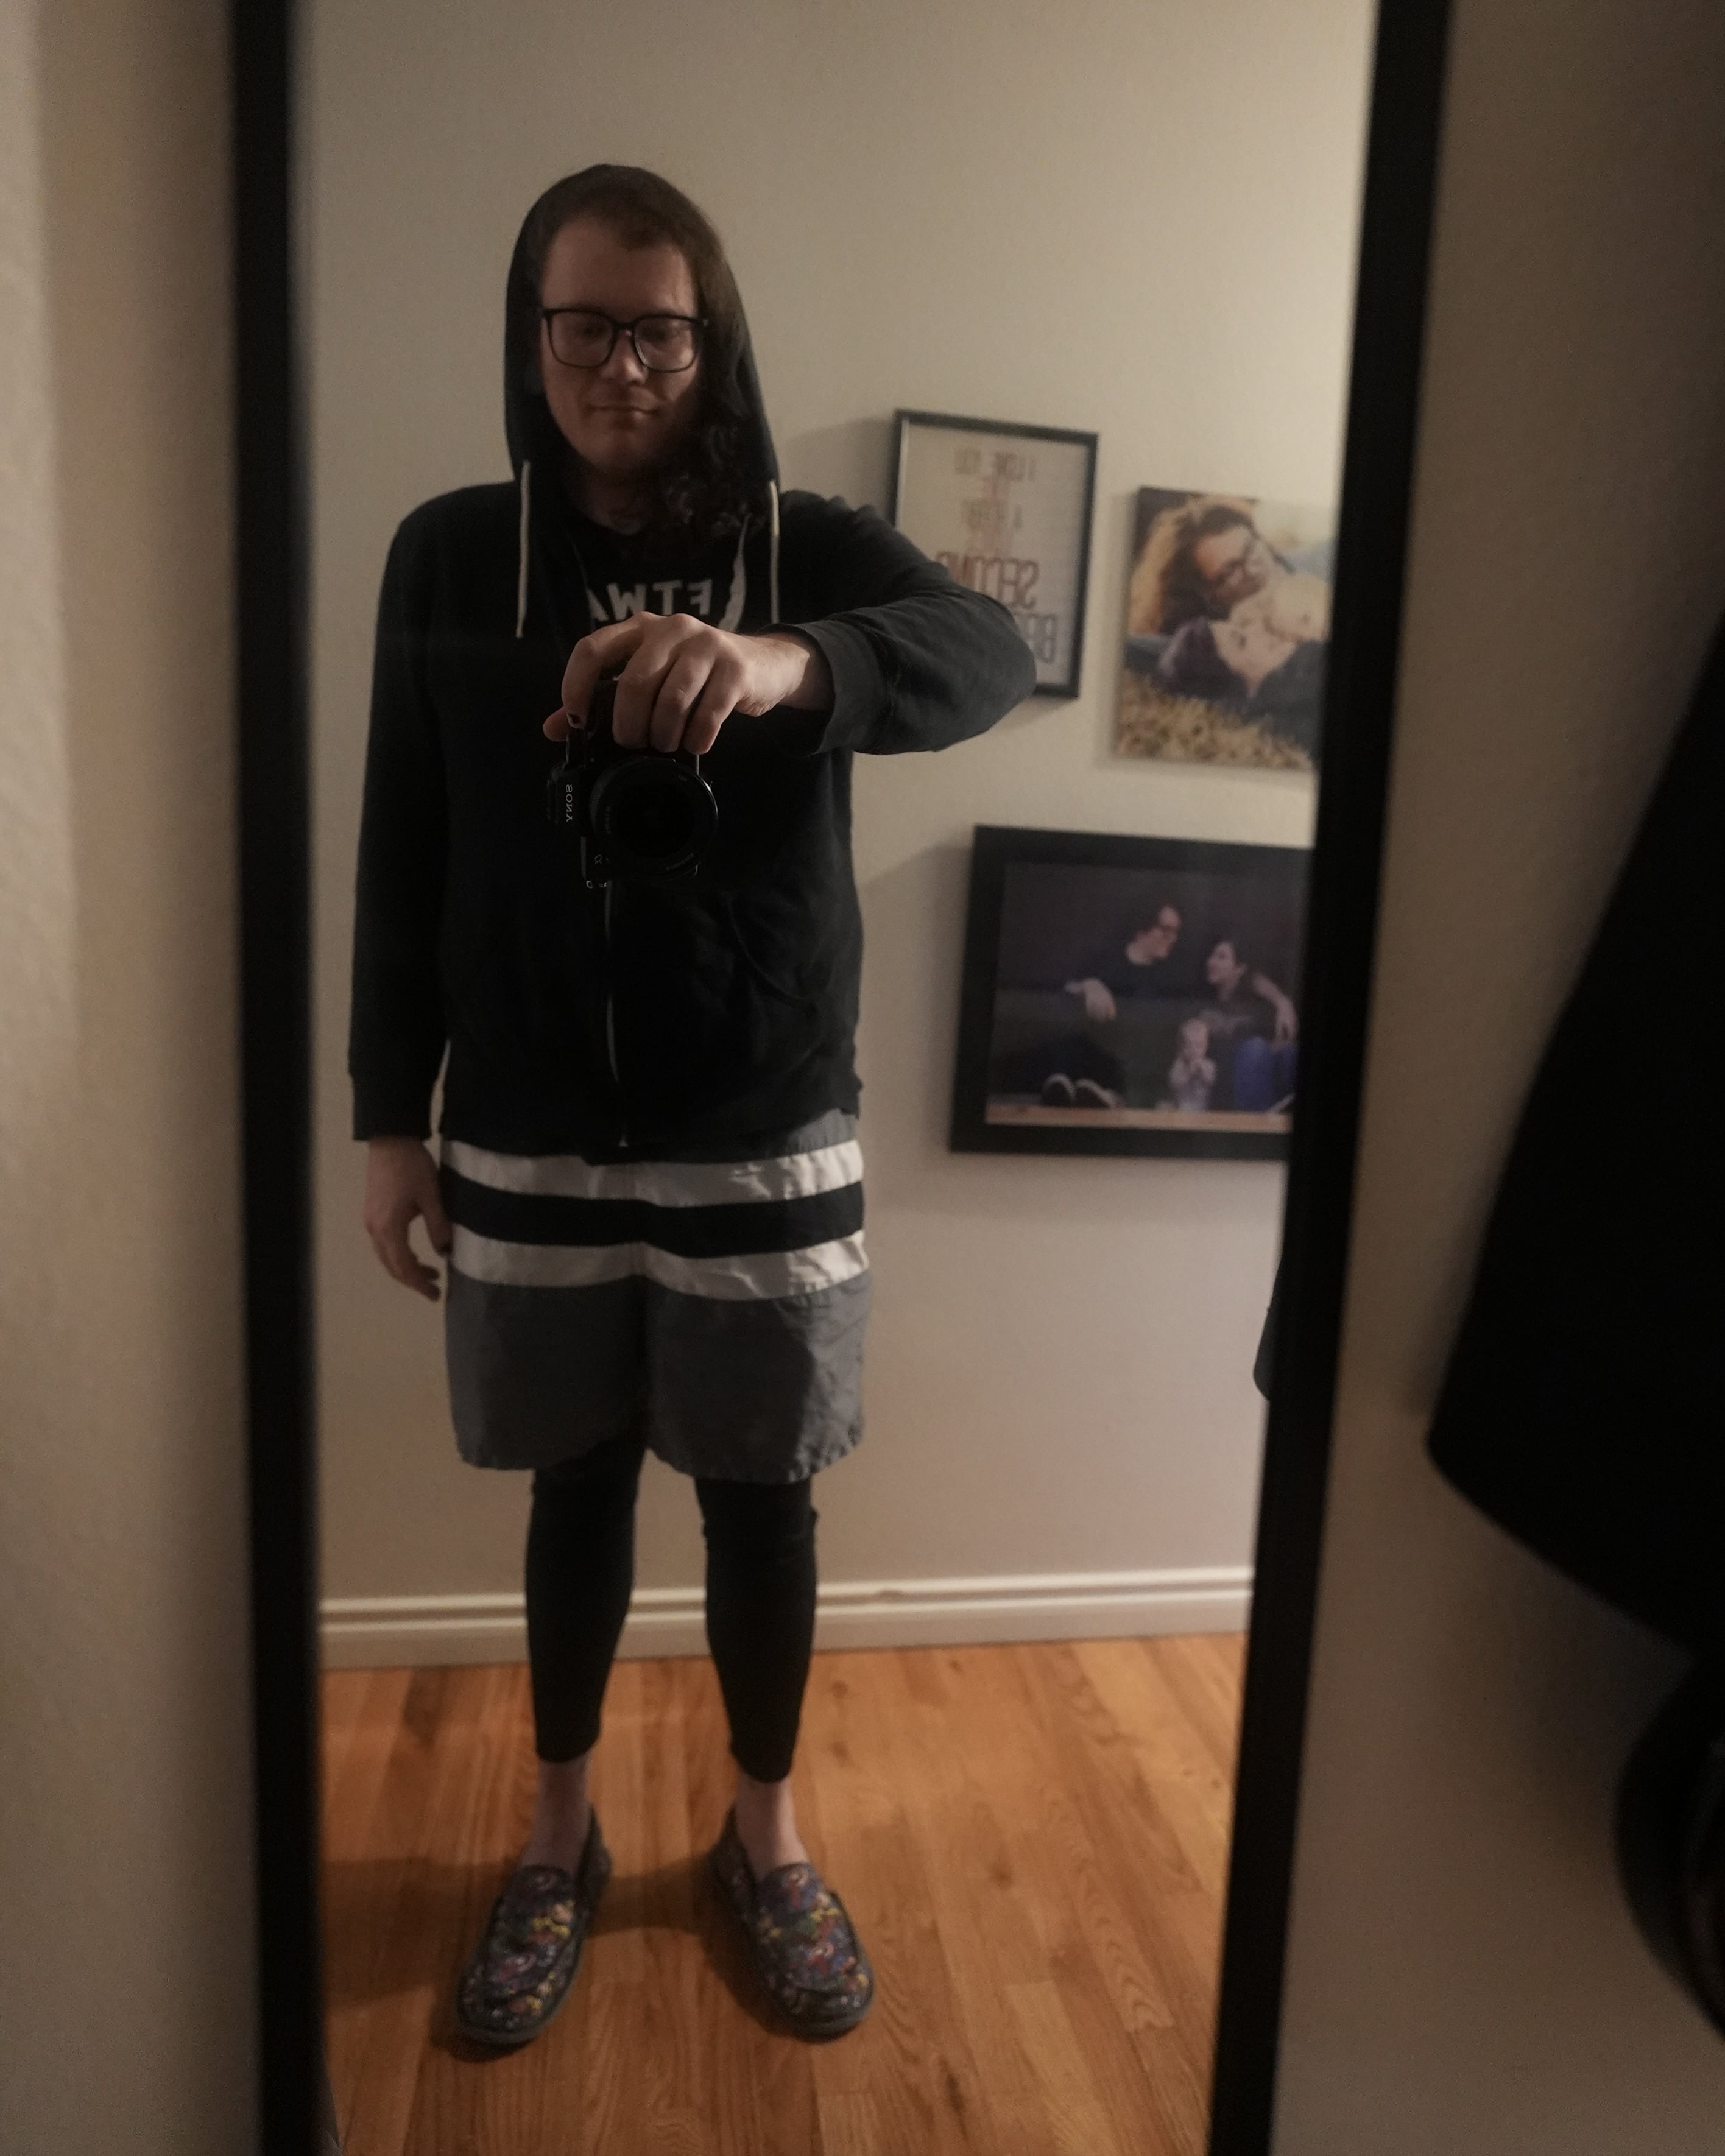 Me standing in a mirror taking a selfie. I'm' wearing black excercise tights under swimshorts and a hoodie and my comic book slippers. You can see blurry photos of our family on the wall behind me.